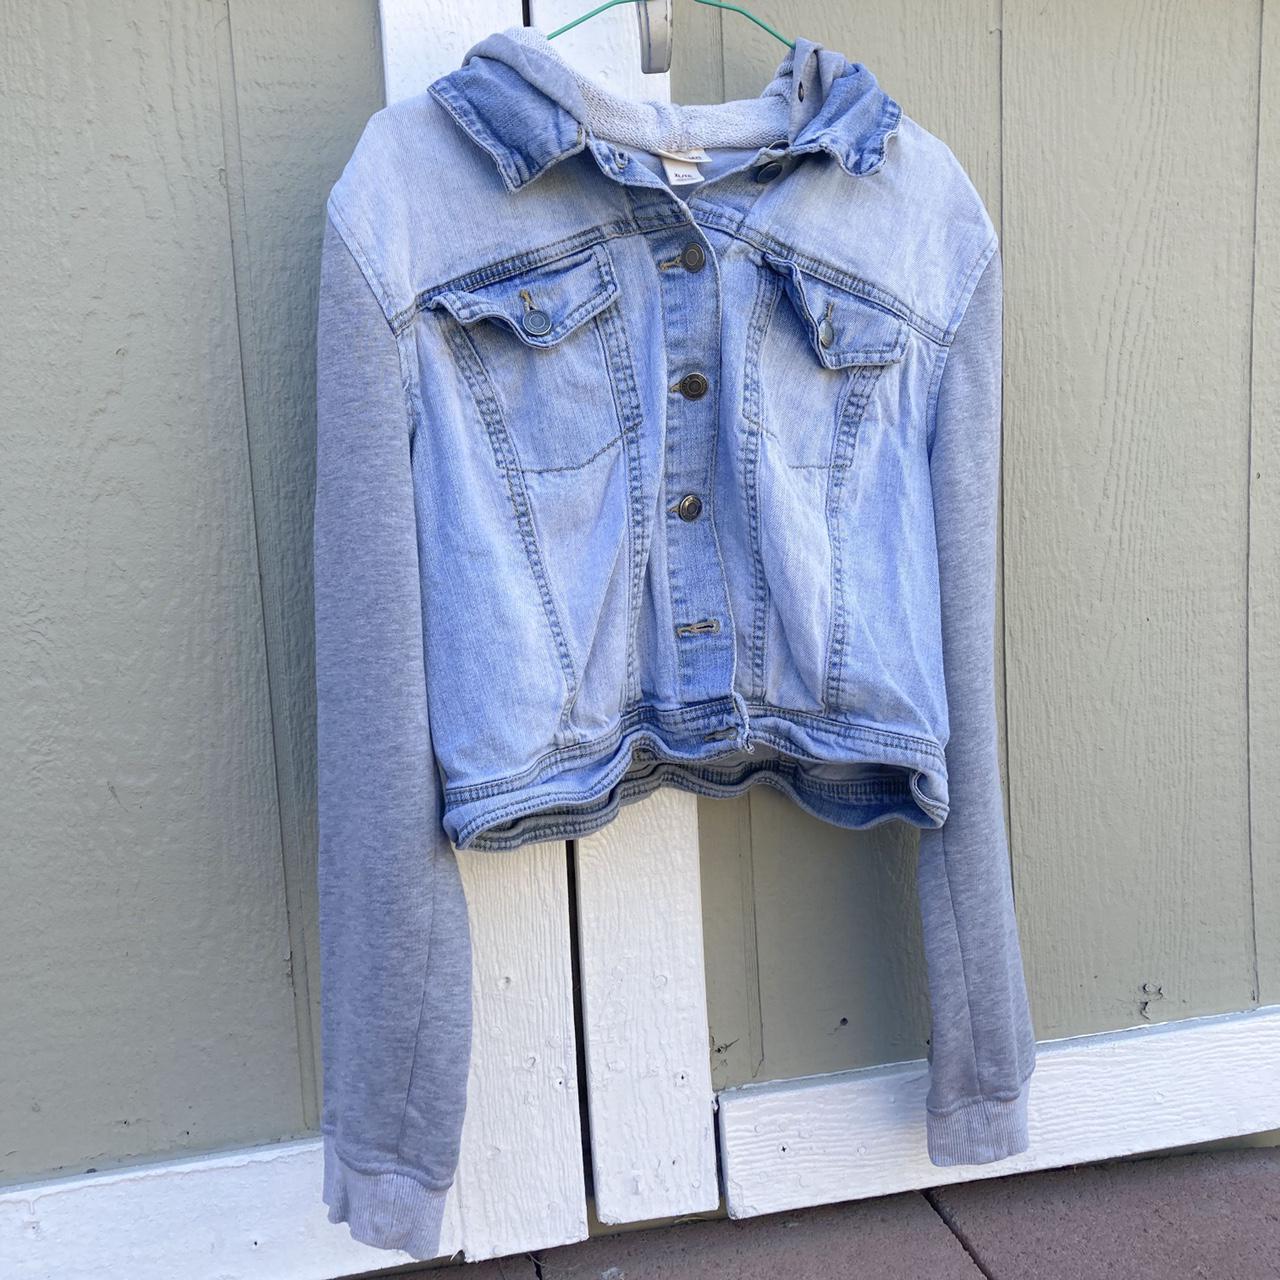 Product Image 2 - ~ Grey jean sweater!
~ Size